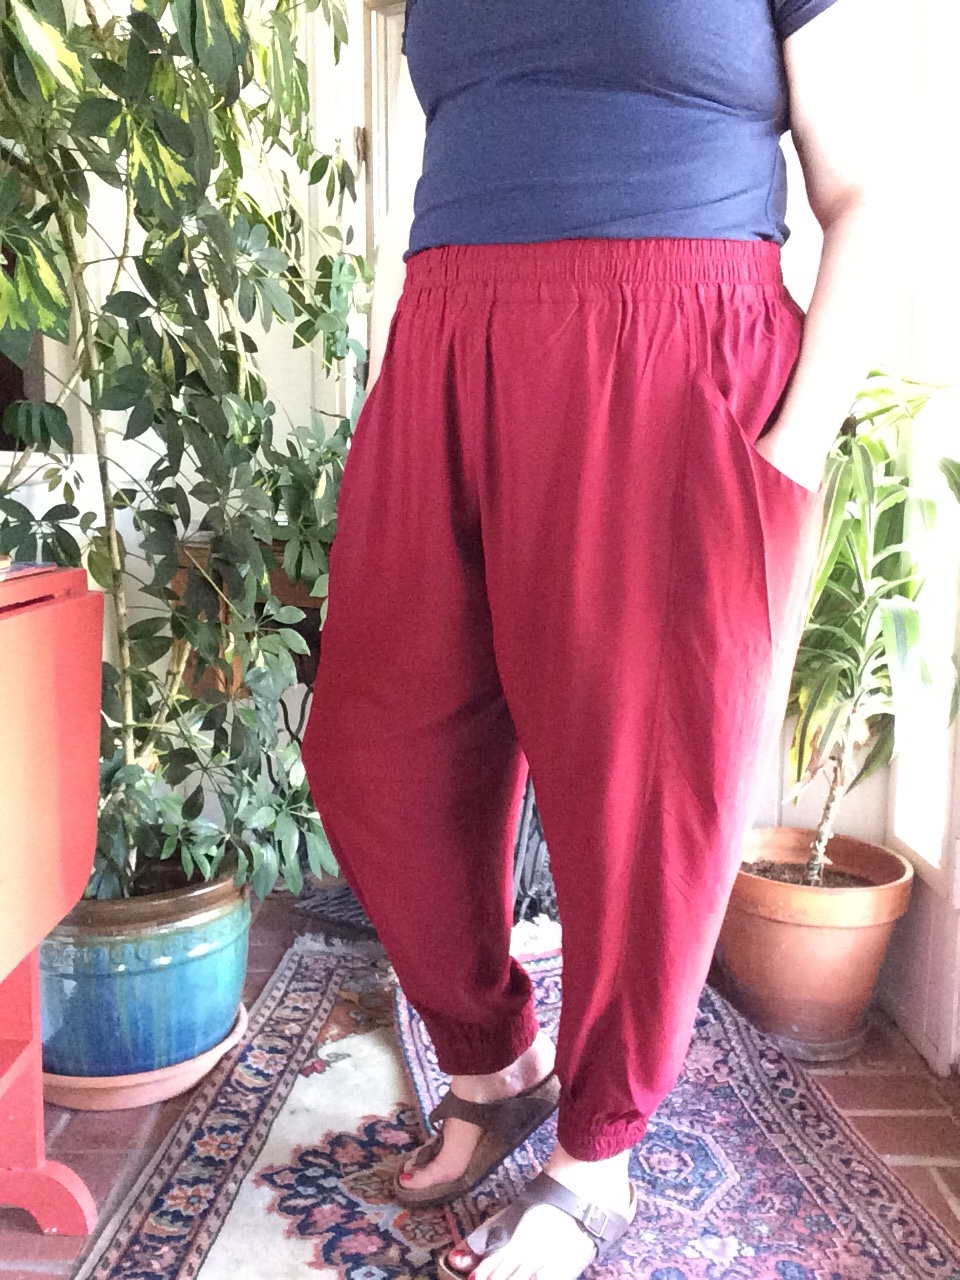 Sew Liberated Arenite Pants – The Green Violet